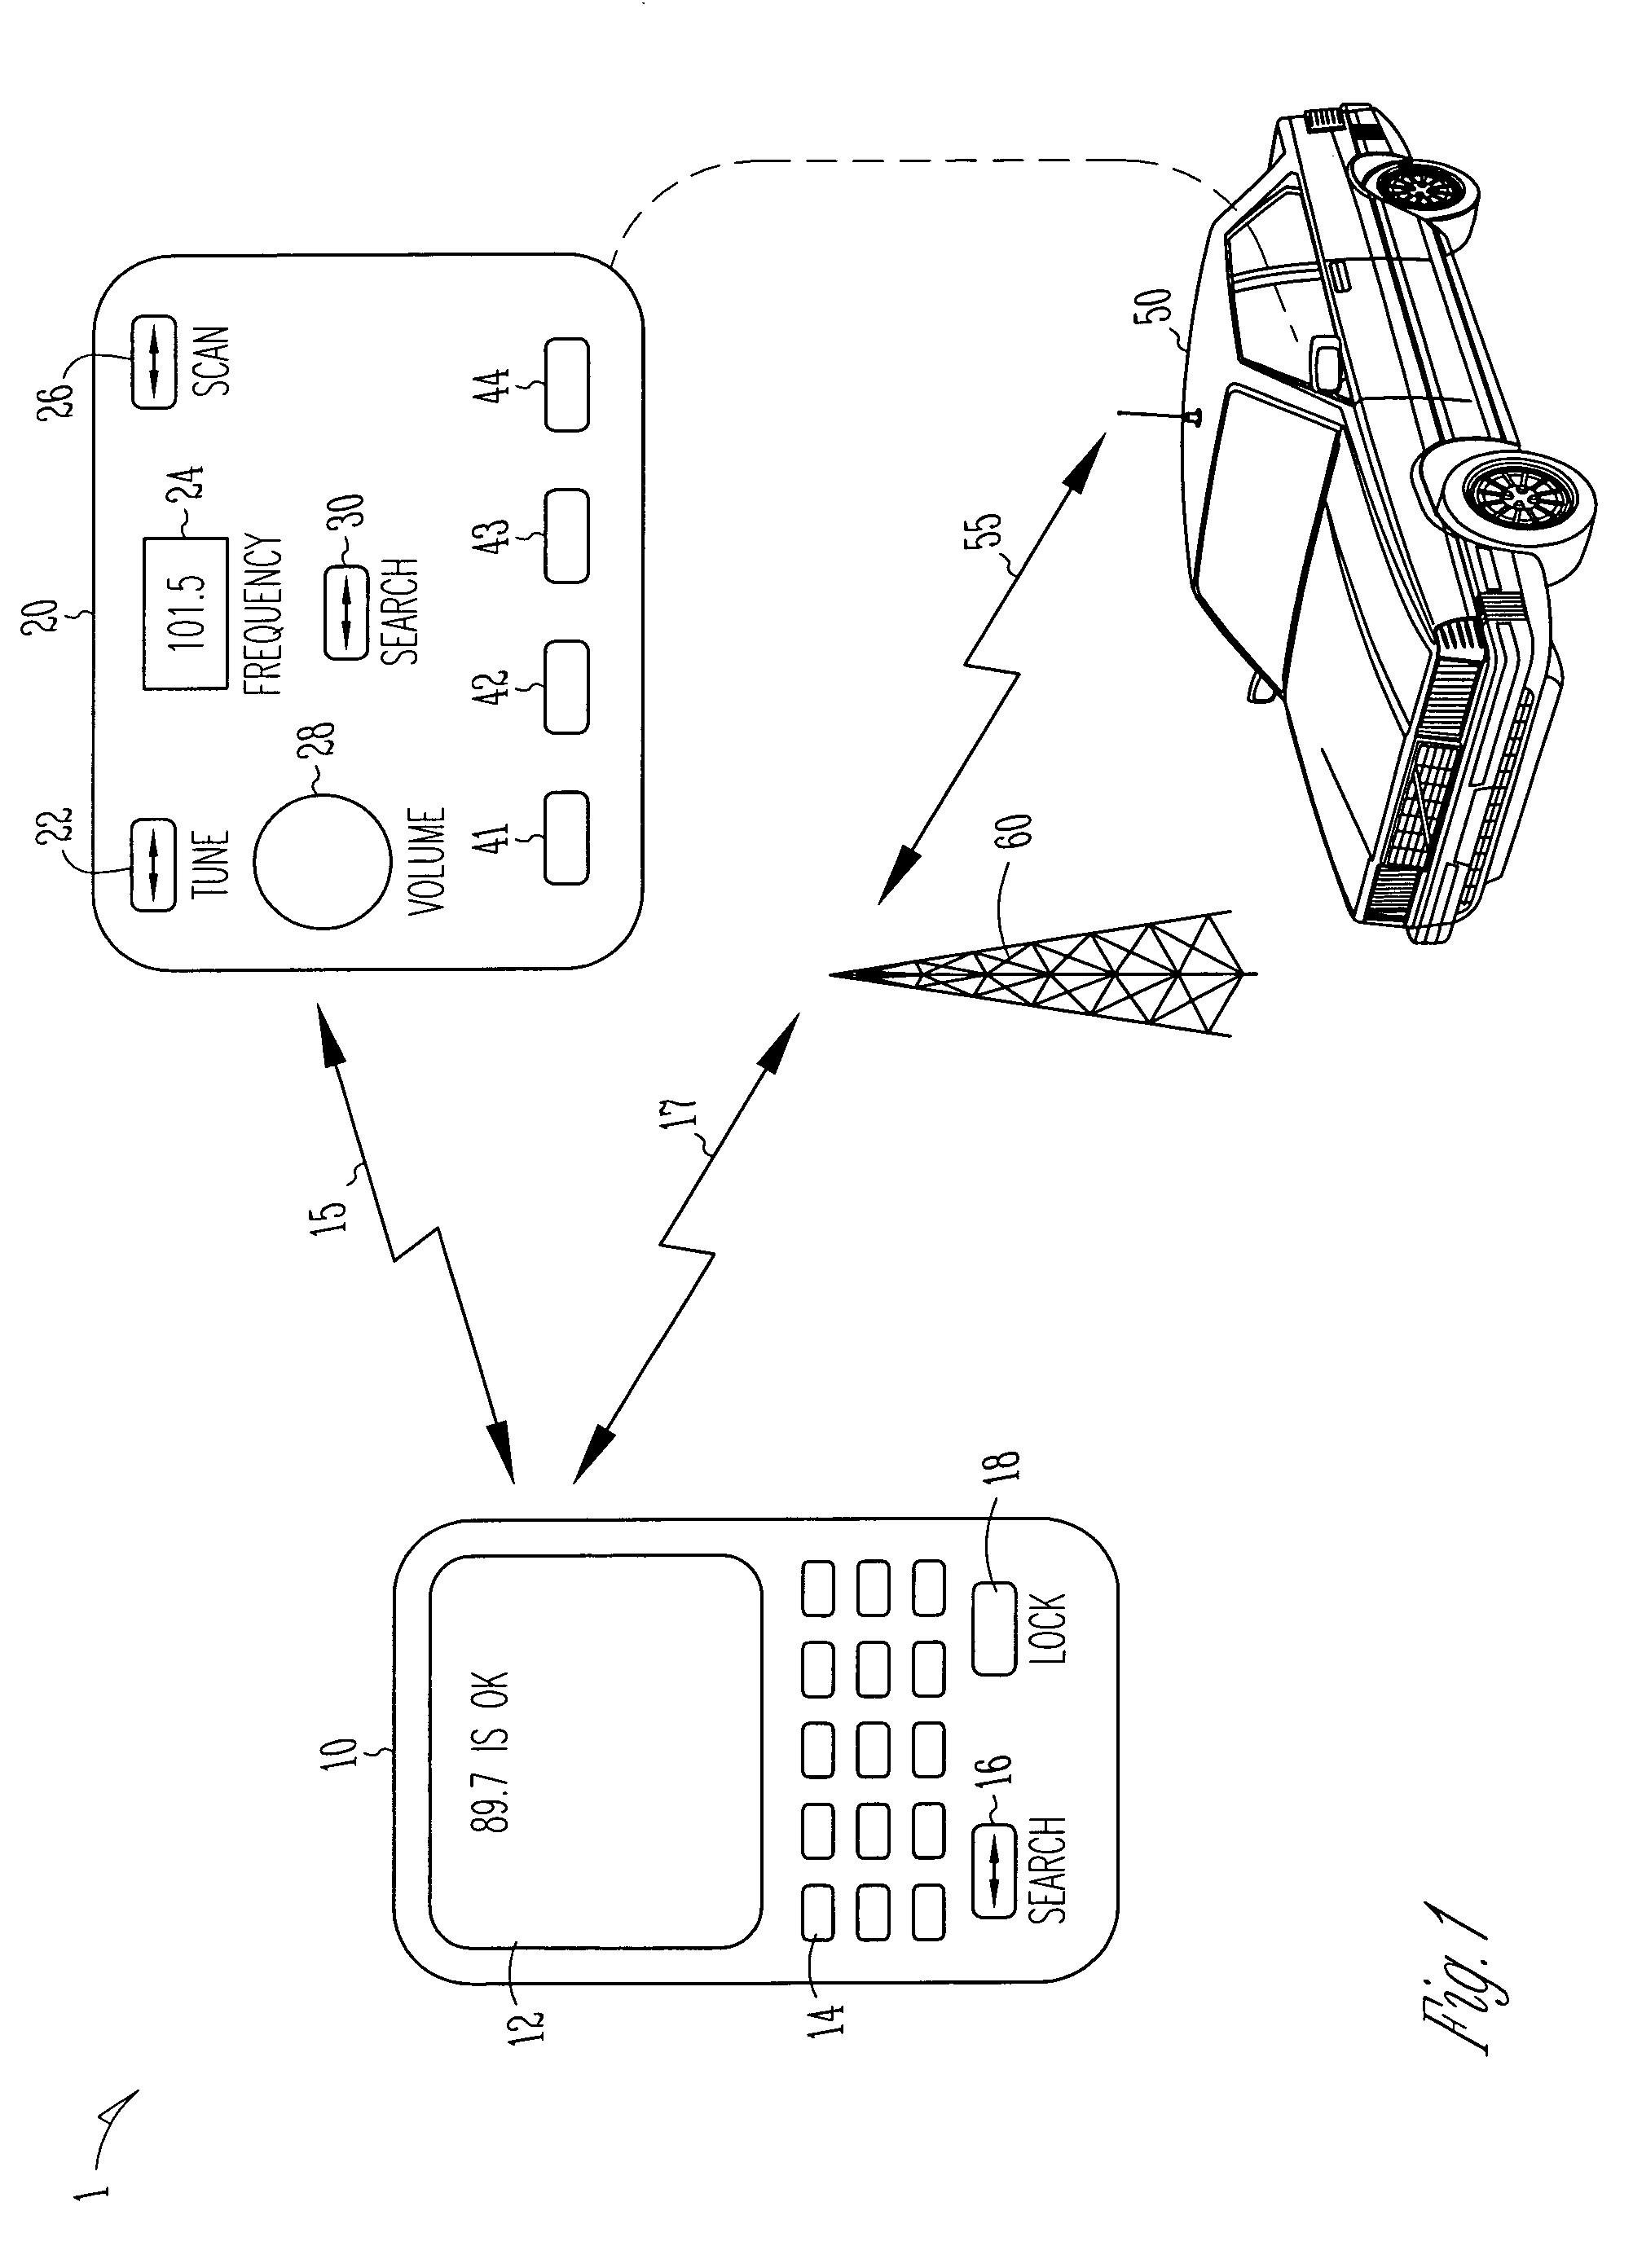 Apparatus and methods for finding and using available transmission frequencies